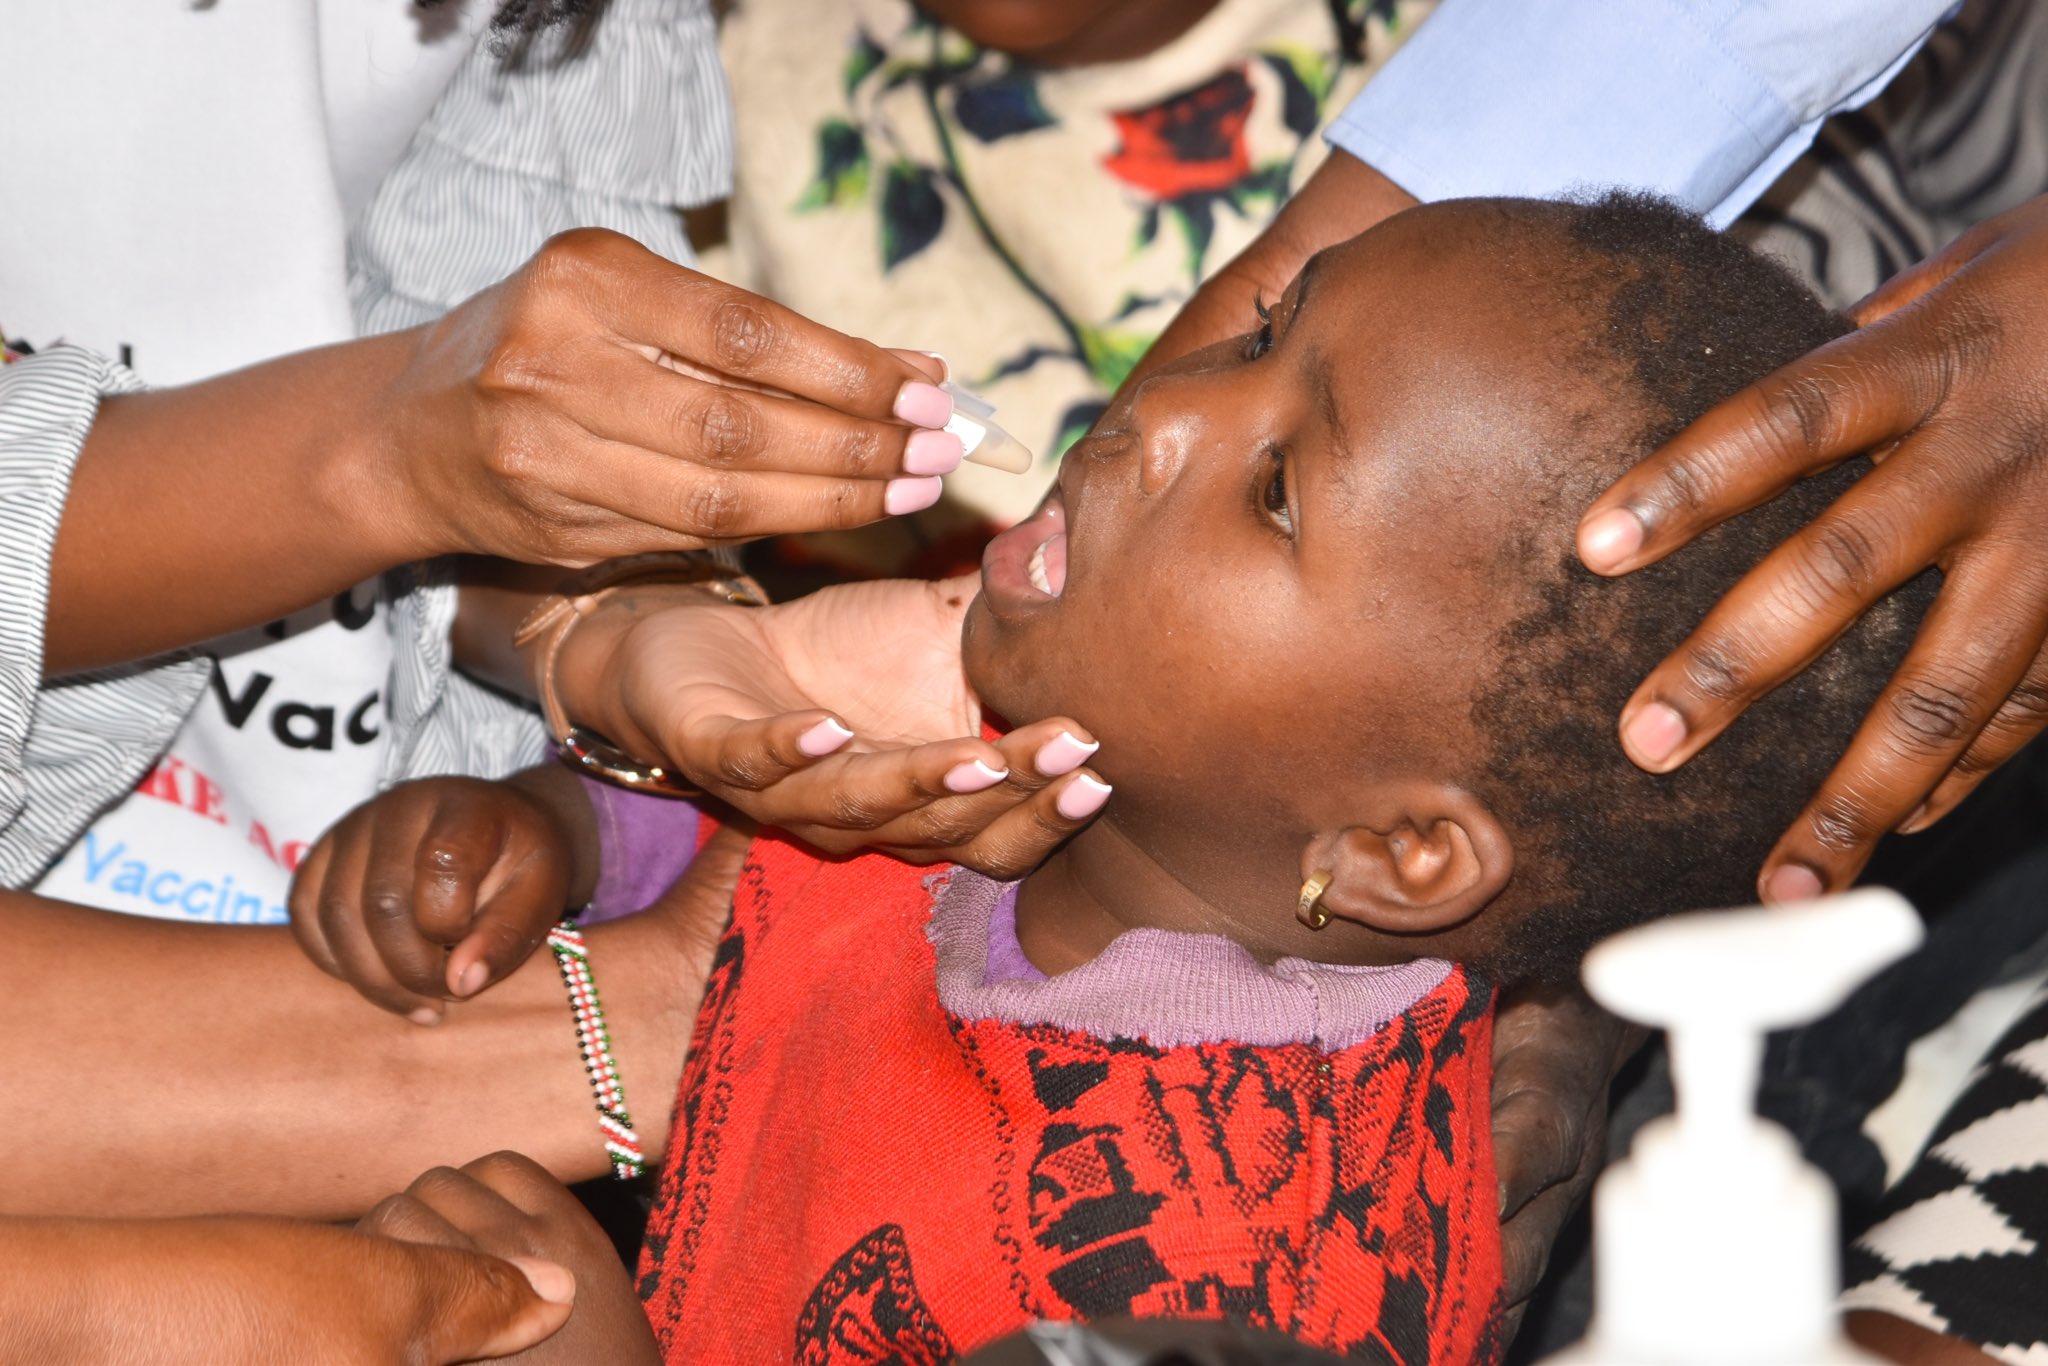 Ministry of Health rolled out Cholera vaccination campaign. 